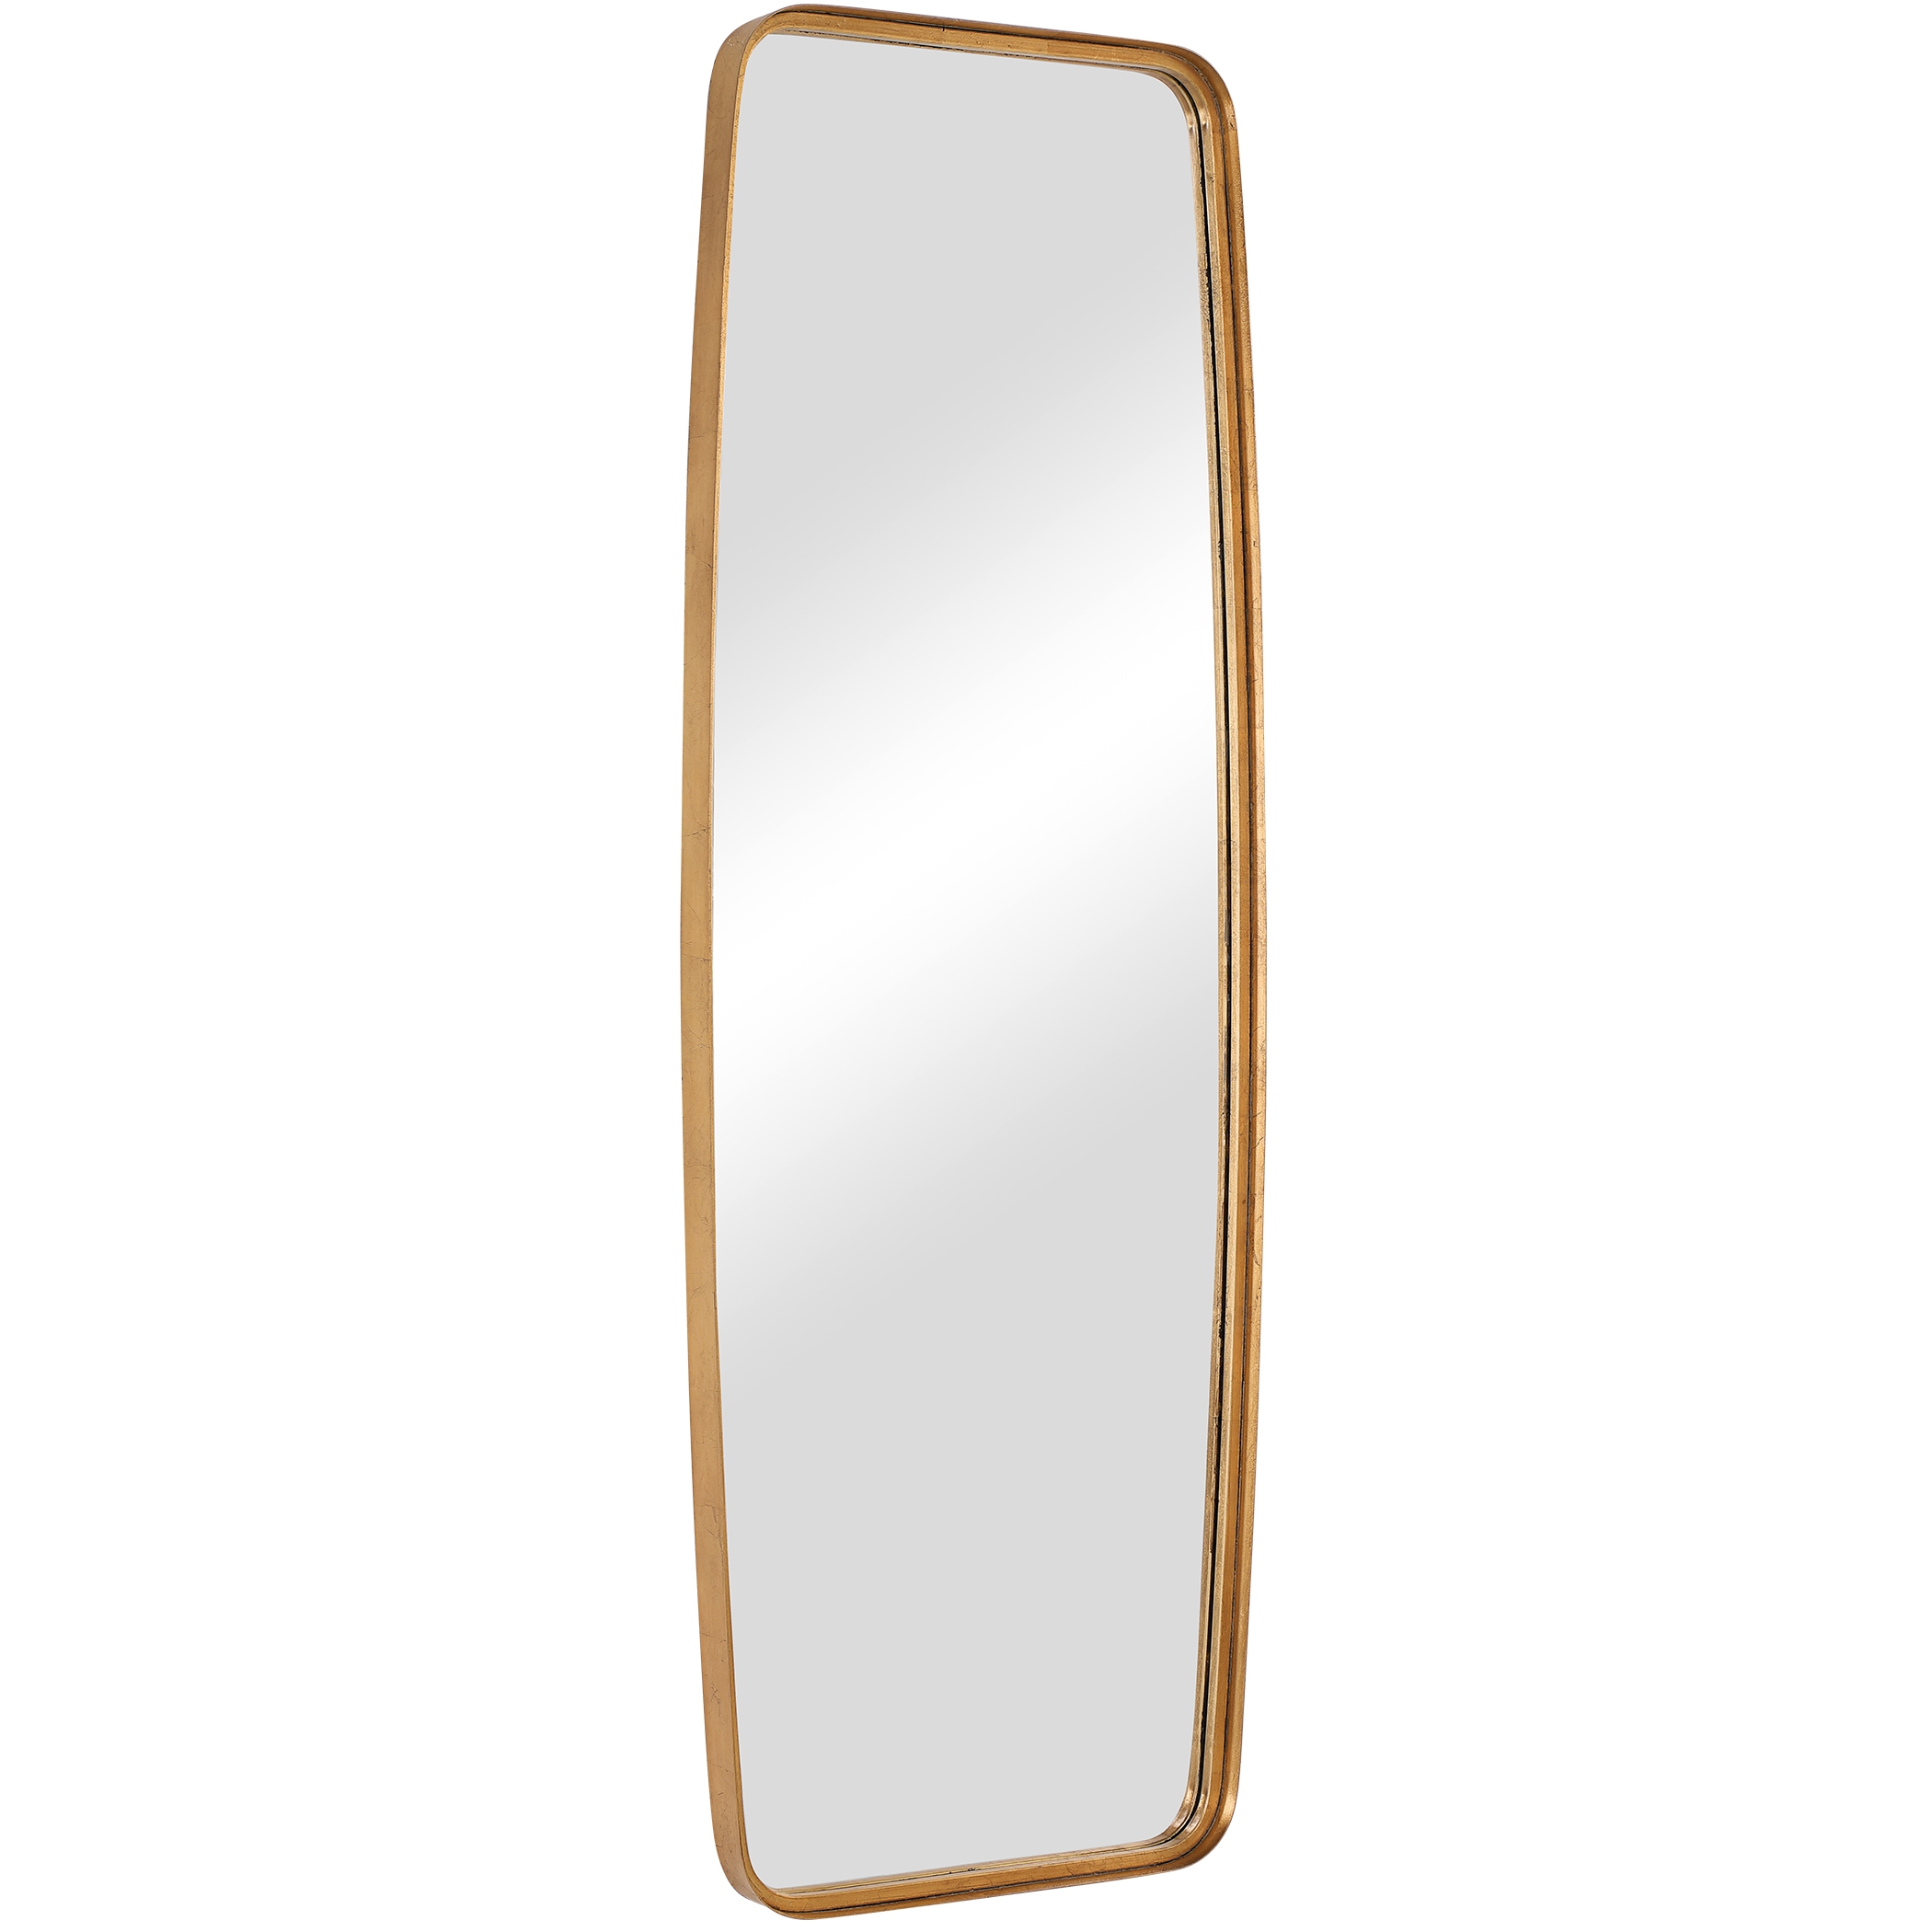 Rounded Corners Mirror - Image 3